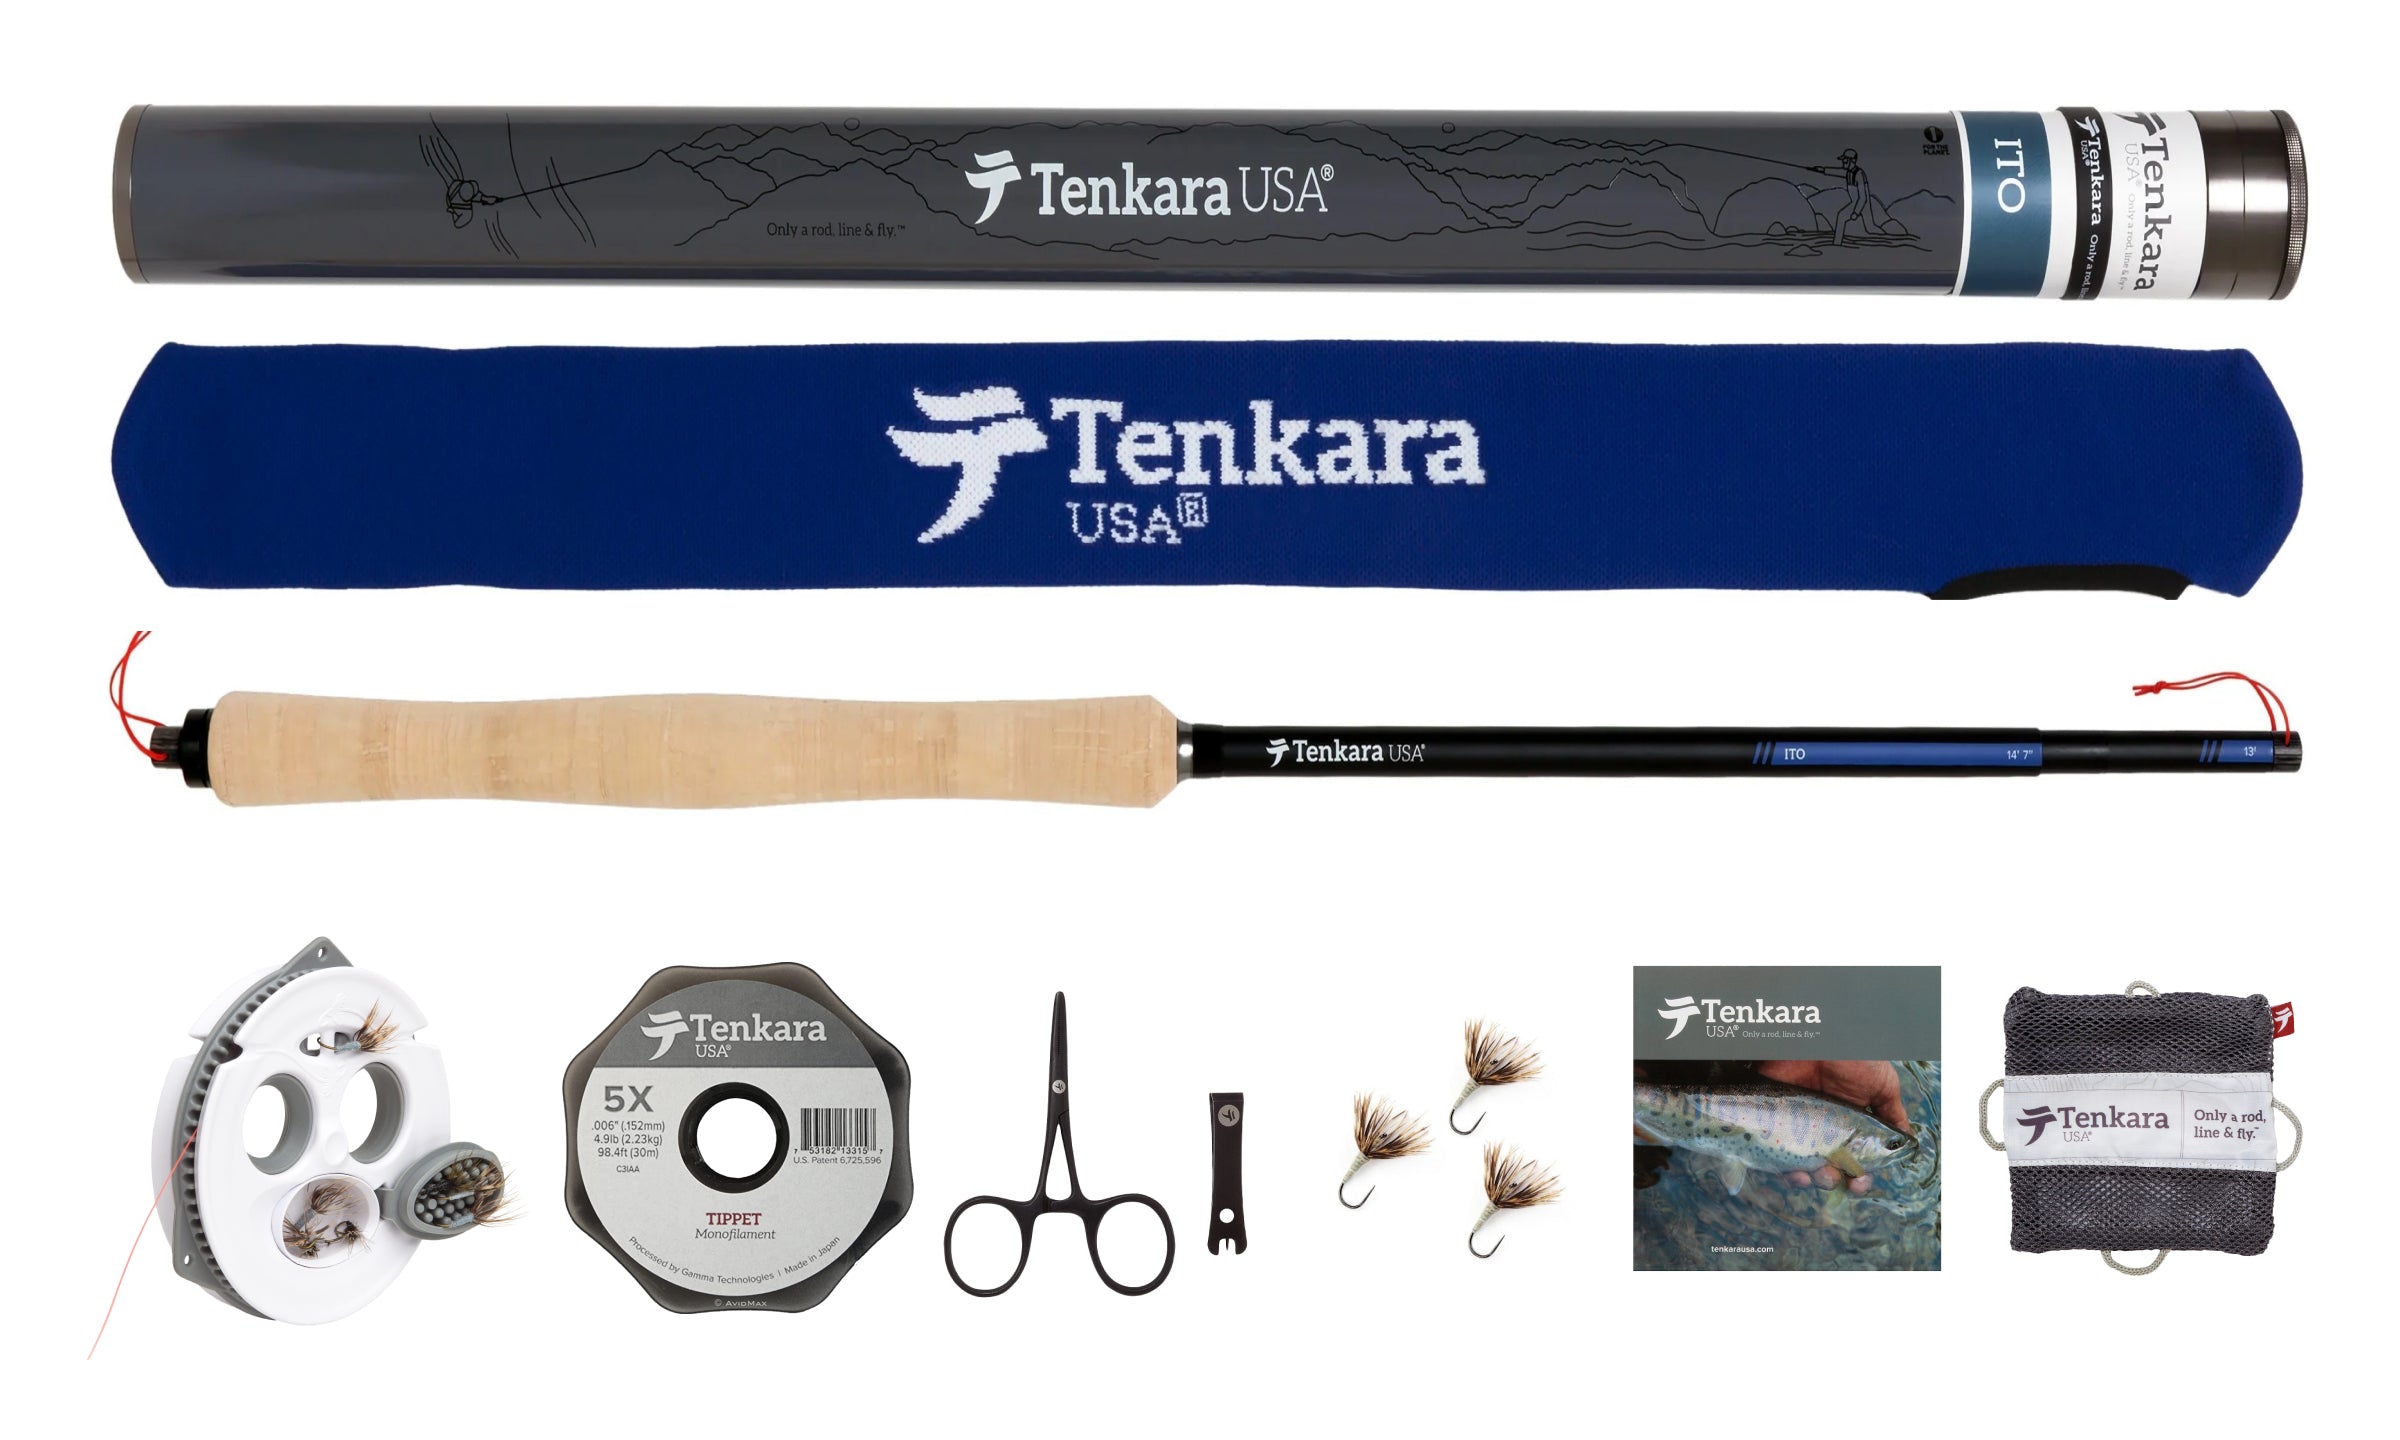 Tenkara USA Releases Two New Rods for 2014